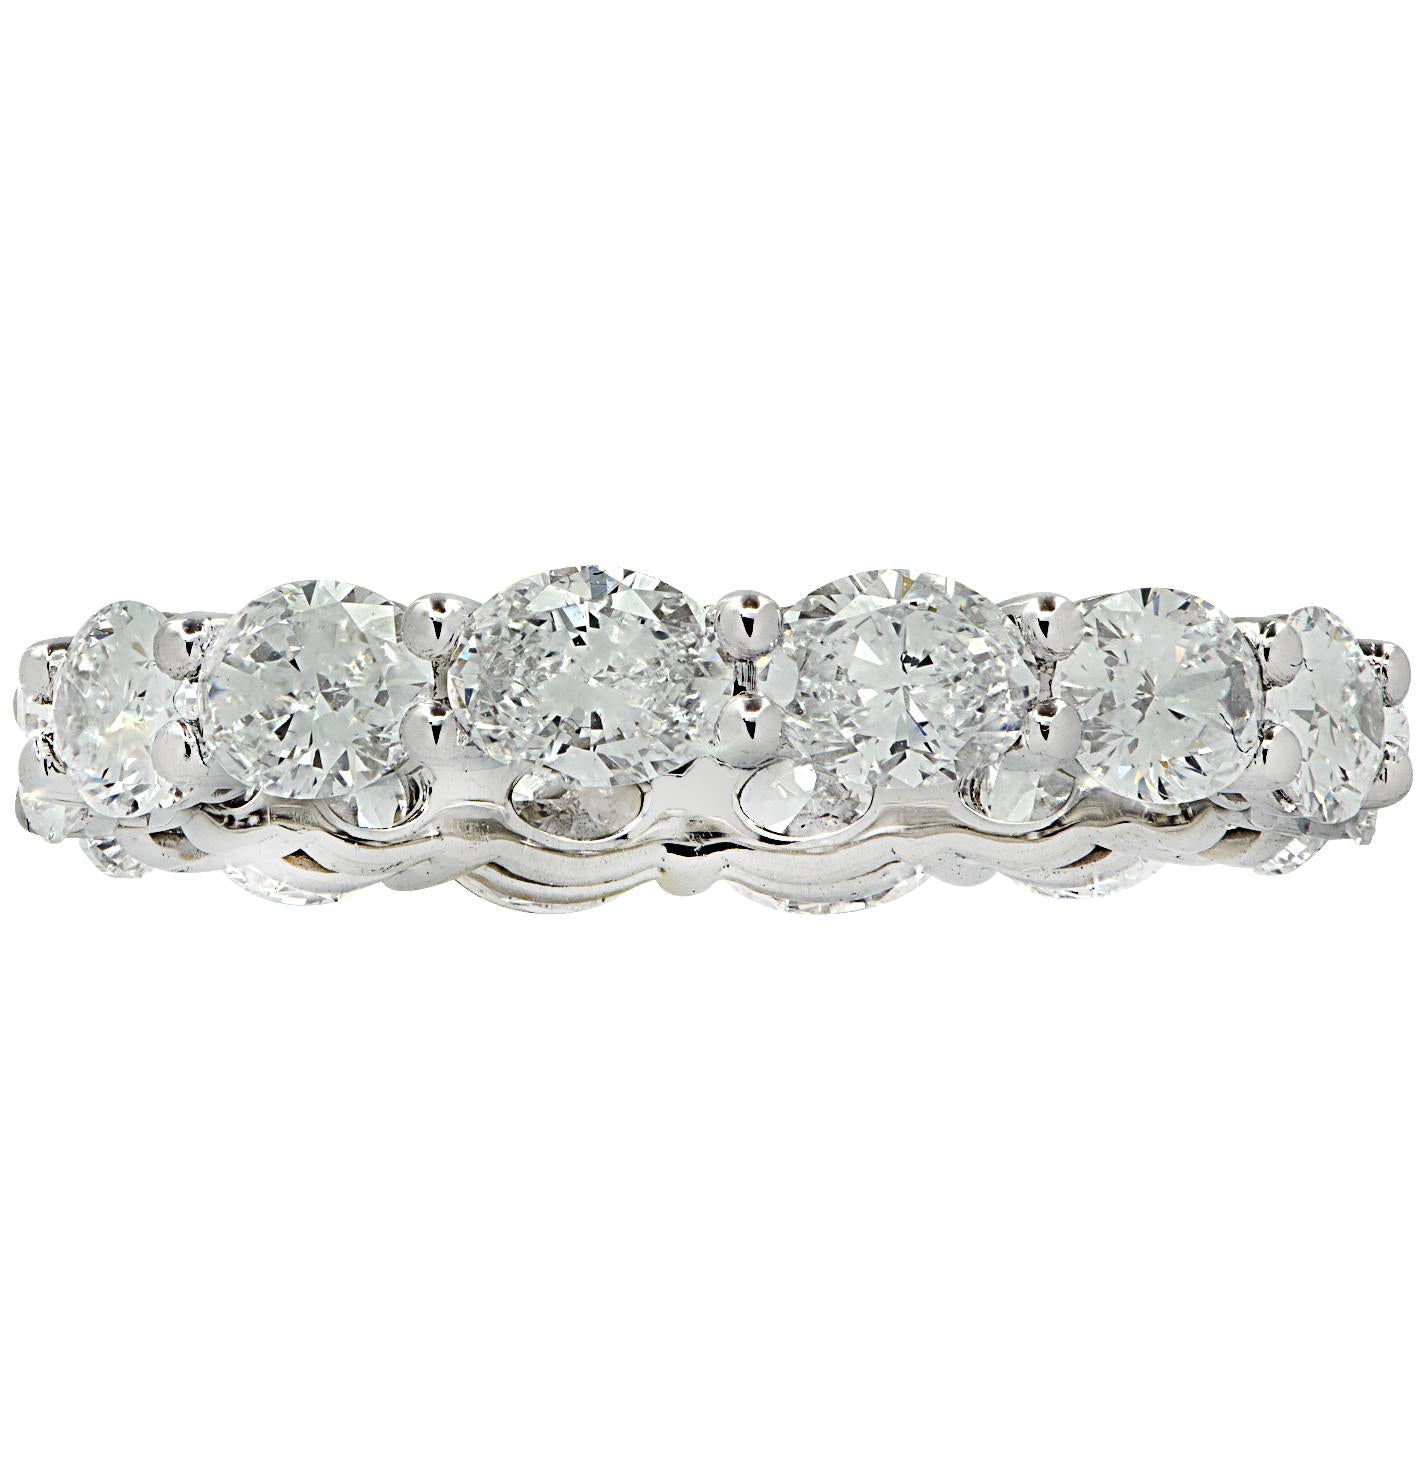 Stunning Vivid Diamonds East-West Eternity Band crafted in 18 karat White Gold, featuring 14 oval cut diamonds weighing 2.60 carats total, D-E color, VVS clarity. These fine diamonds are seamlessly set, east-west, in a modern take on the classic